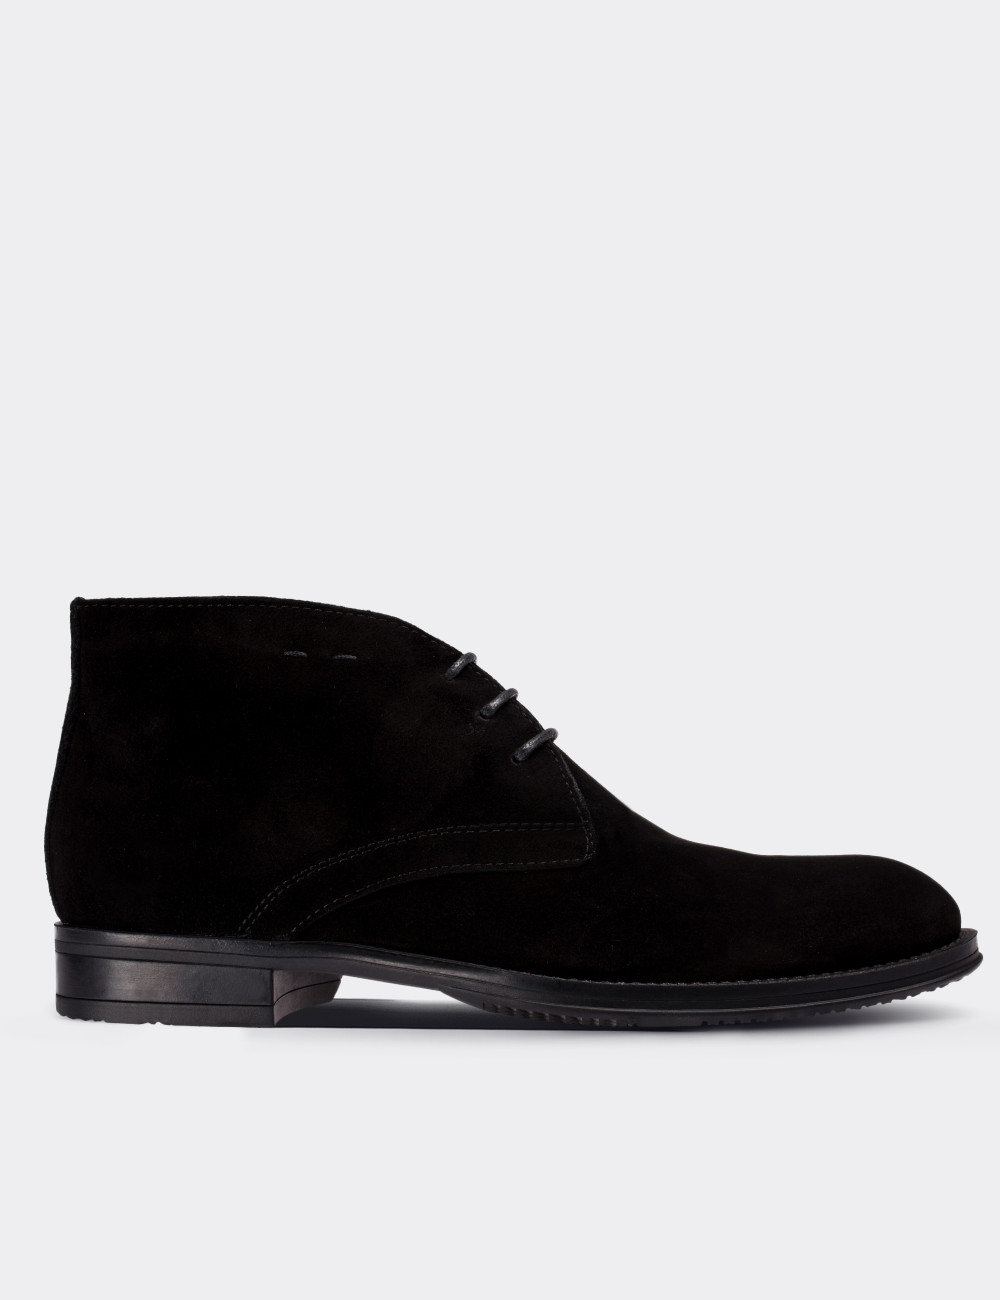 Black Suede Leather Desert Boots 01295MSYHC04 - Deery